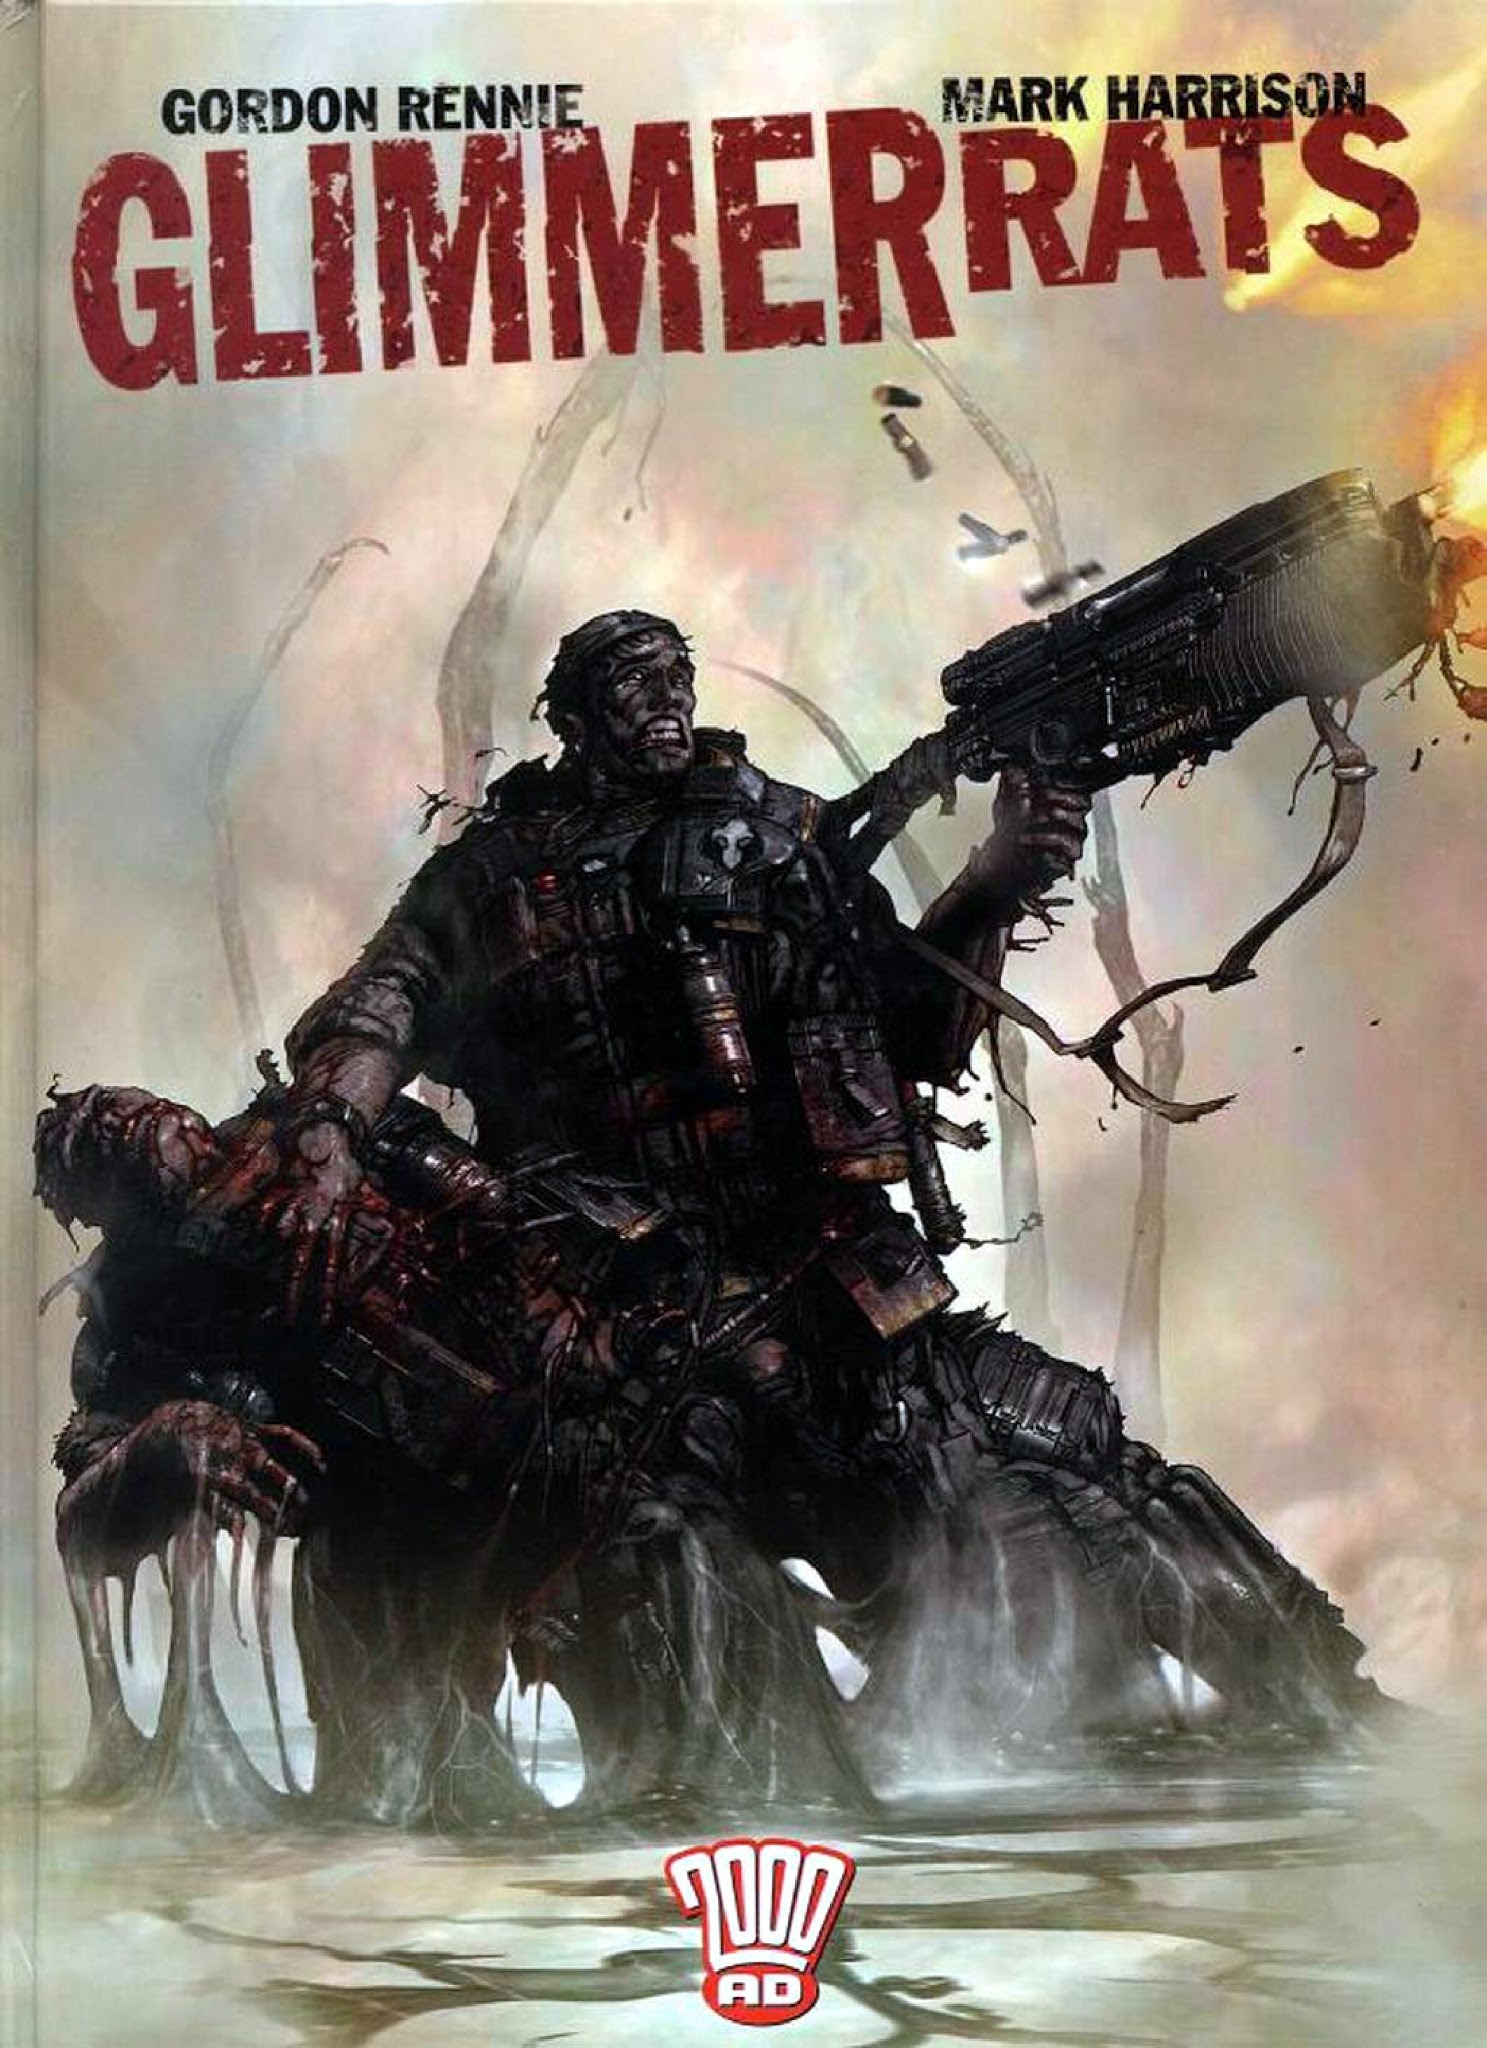 Read online Glimmer Rats comic -  Issue # TPB - 1